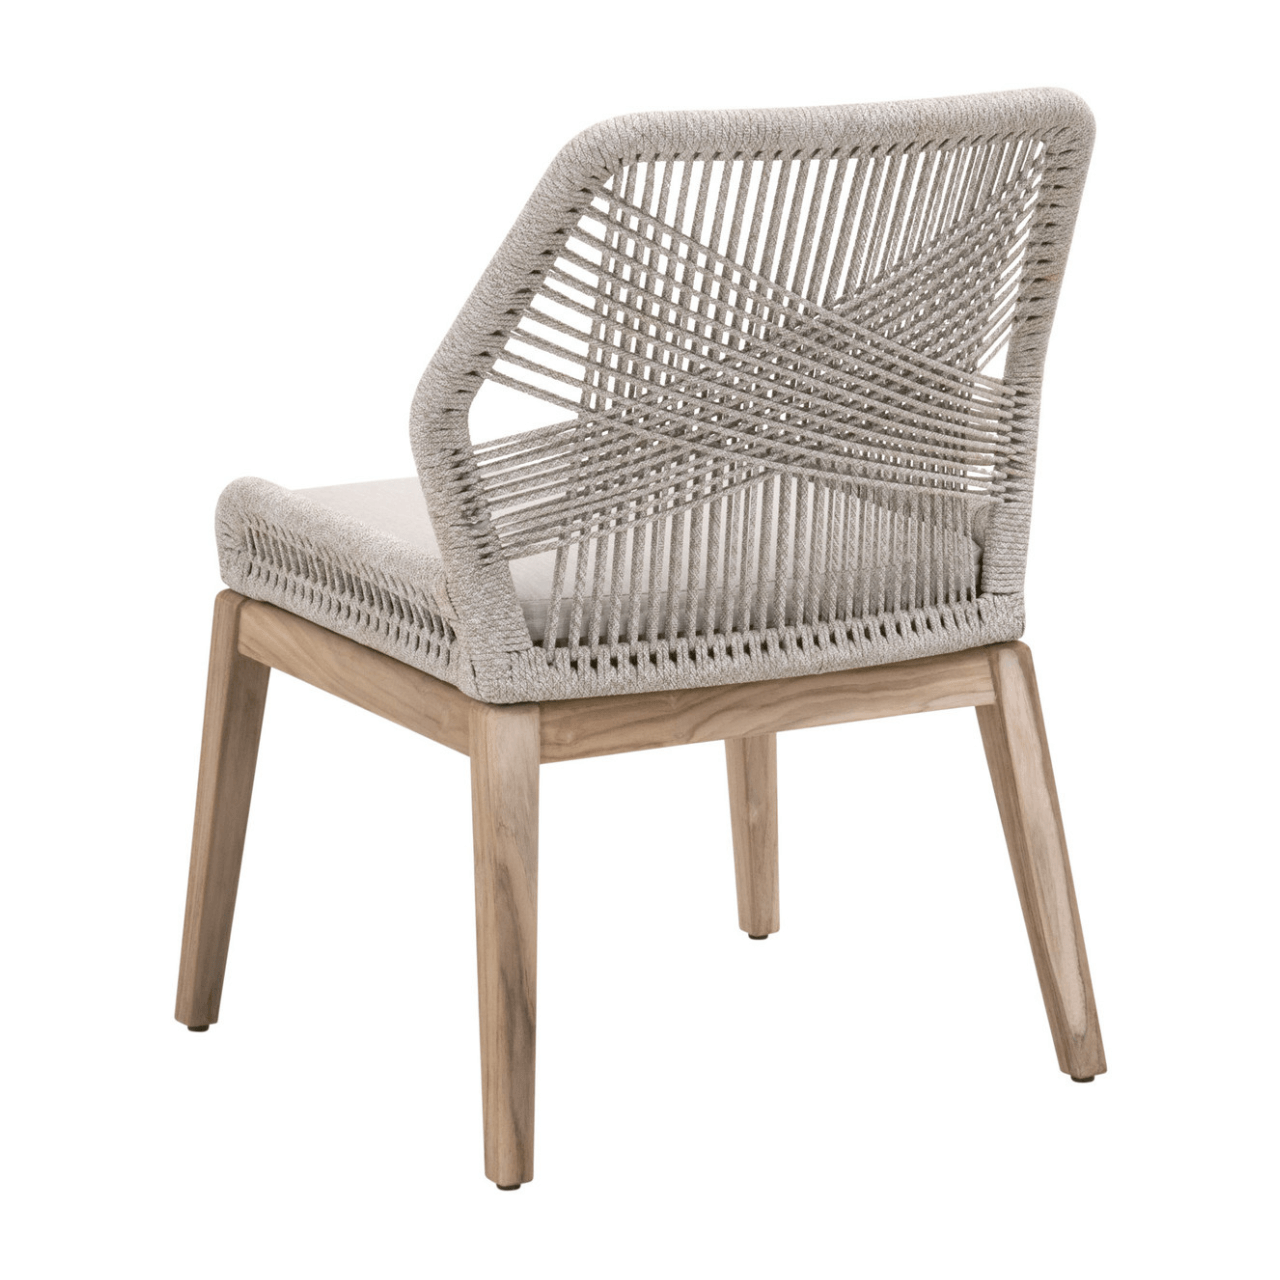 Boxhill's Woven Loom Outdoor Dining Chair | Set of 2 solo image